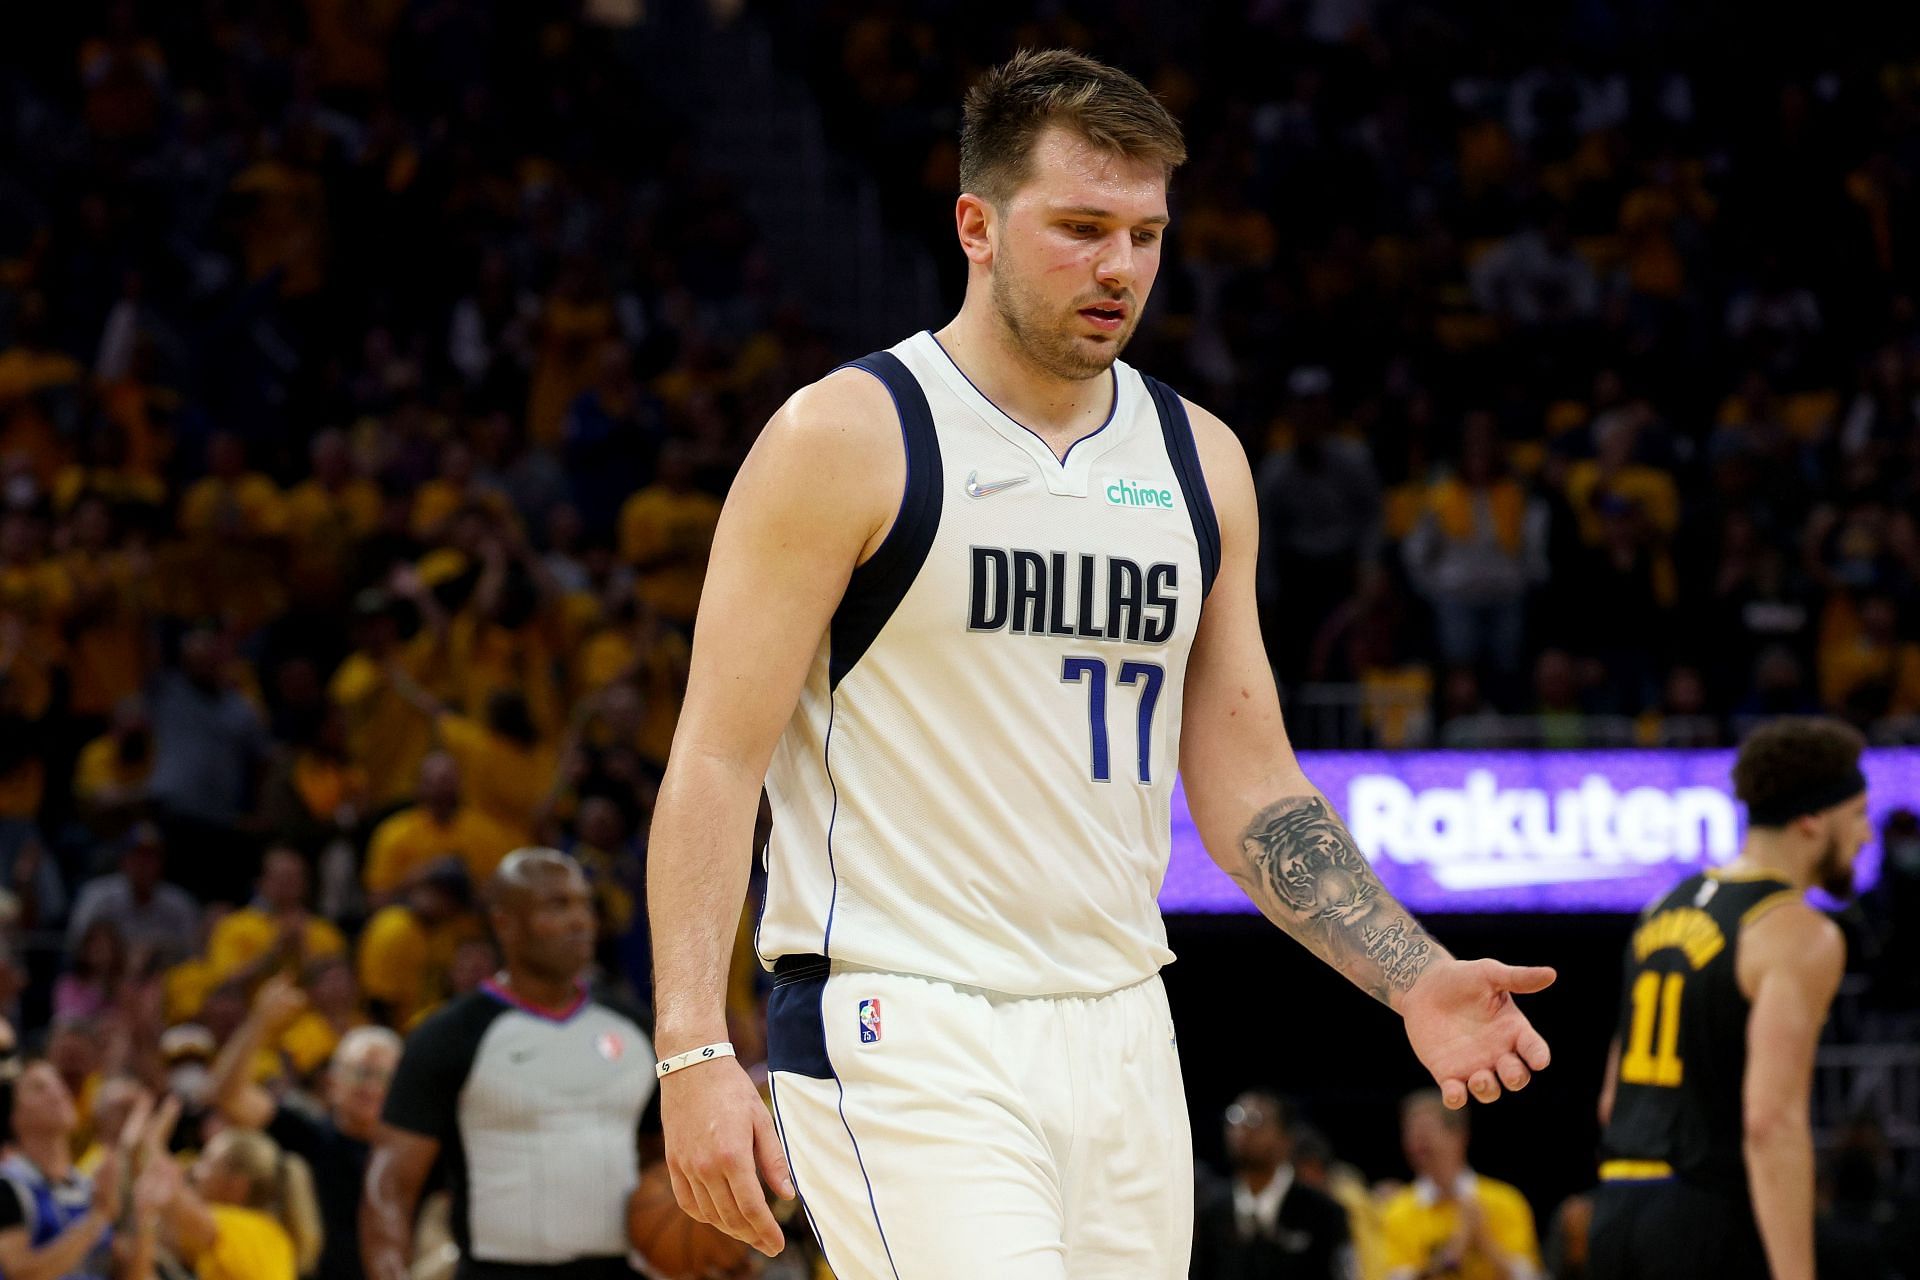 Luka Doncic #77 of the Dallas Mavericks reacts to a play against the Golden State Warriors during the second quarter in Game One of the 2022 NBA Playoffs Western Conference Finals at Chase Center on May 18, 2022 in San Francisco, California.